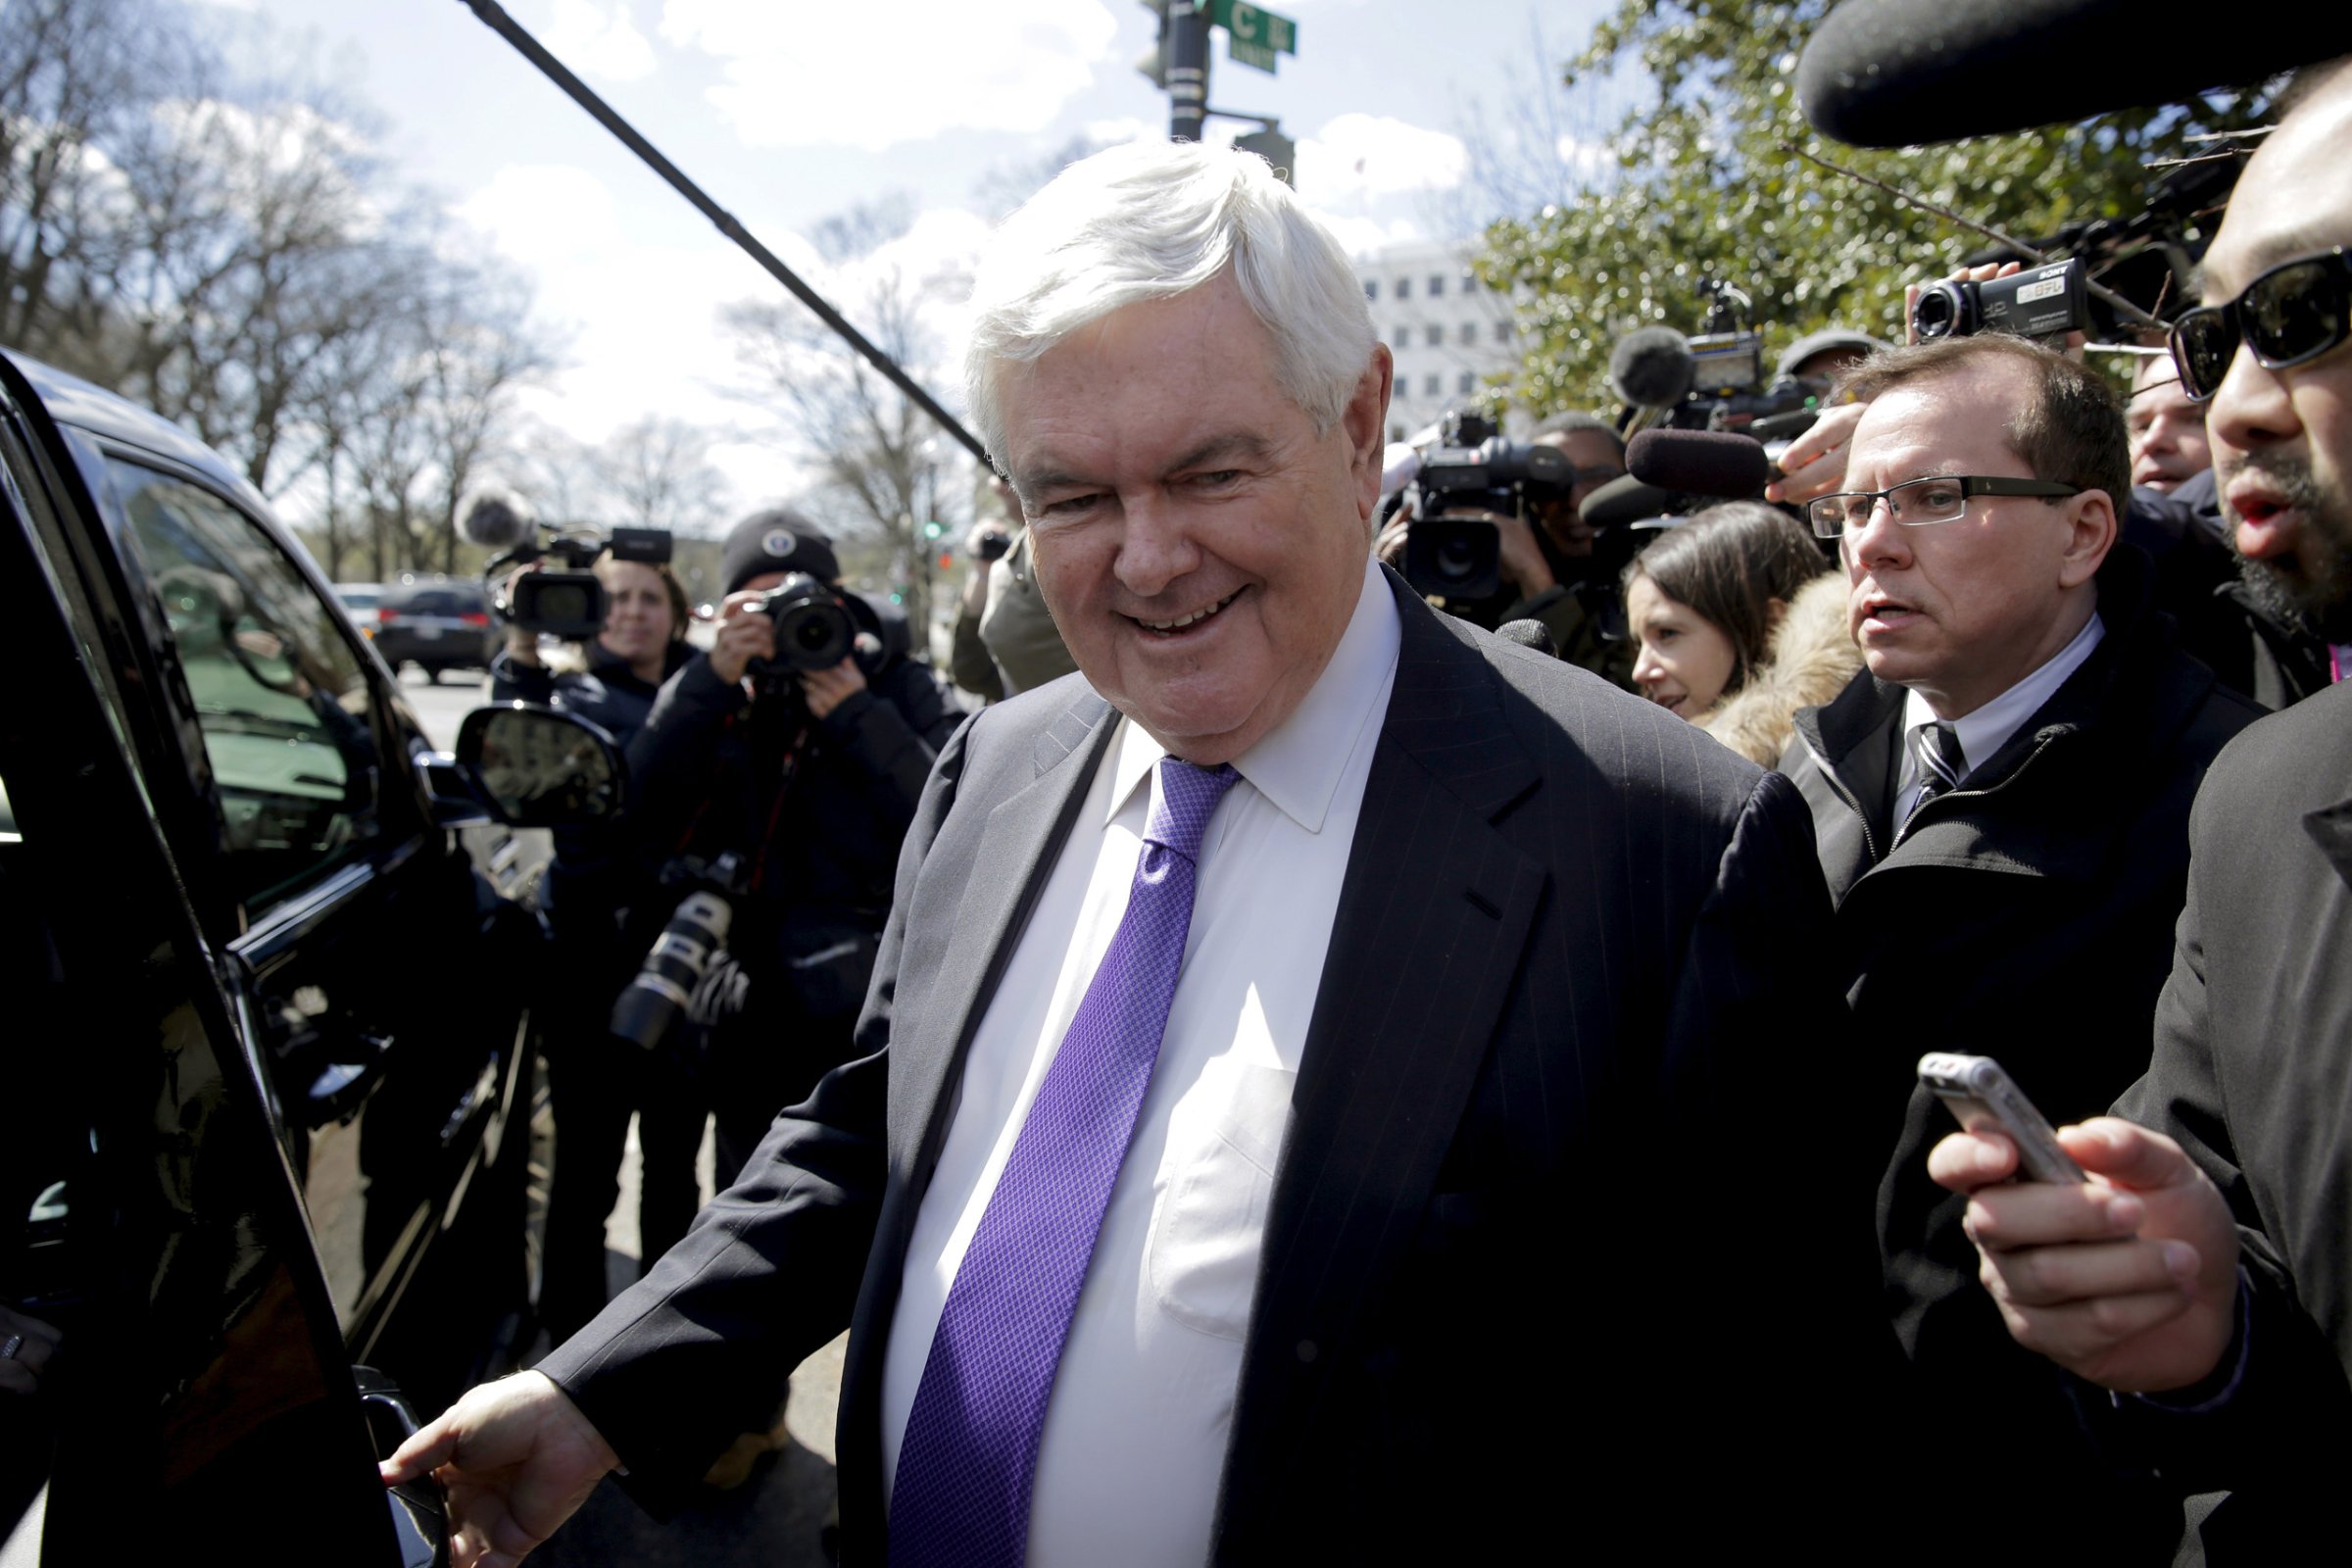 Newt Gingrich is followed by the media as he walks from a meeting with Republican presidential candidate Donald Trump in Washington, March 21, 2016.